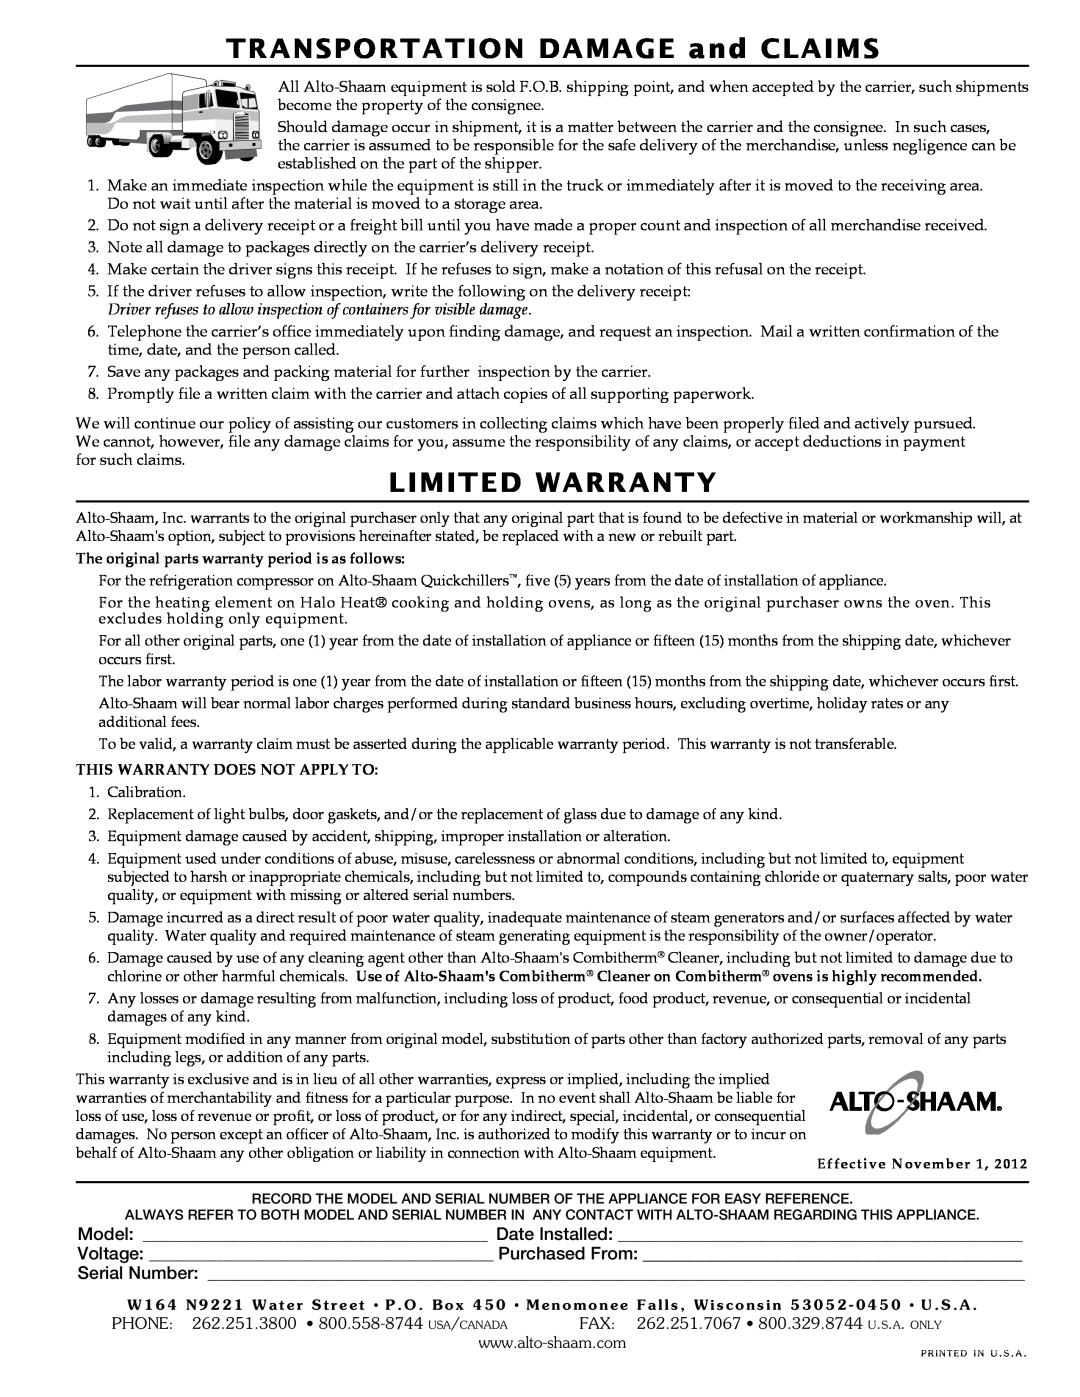 Alto-Shaam 750-TH/III transPortatIon DaMaGe and claIMs, lIMIteD WarrantY, The original parts warranty period is as follows 